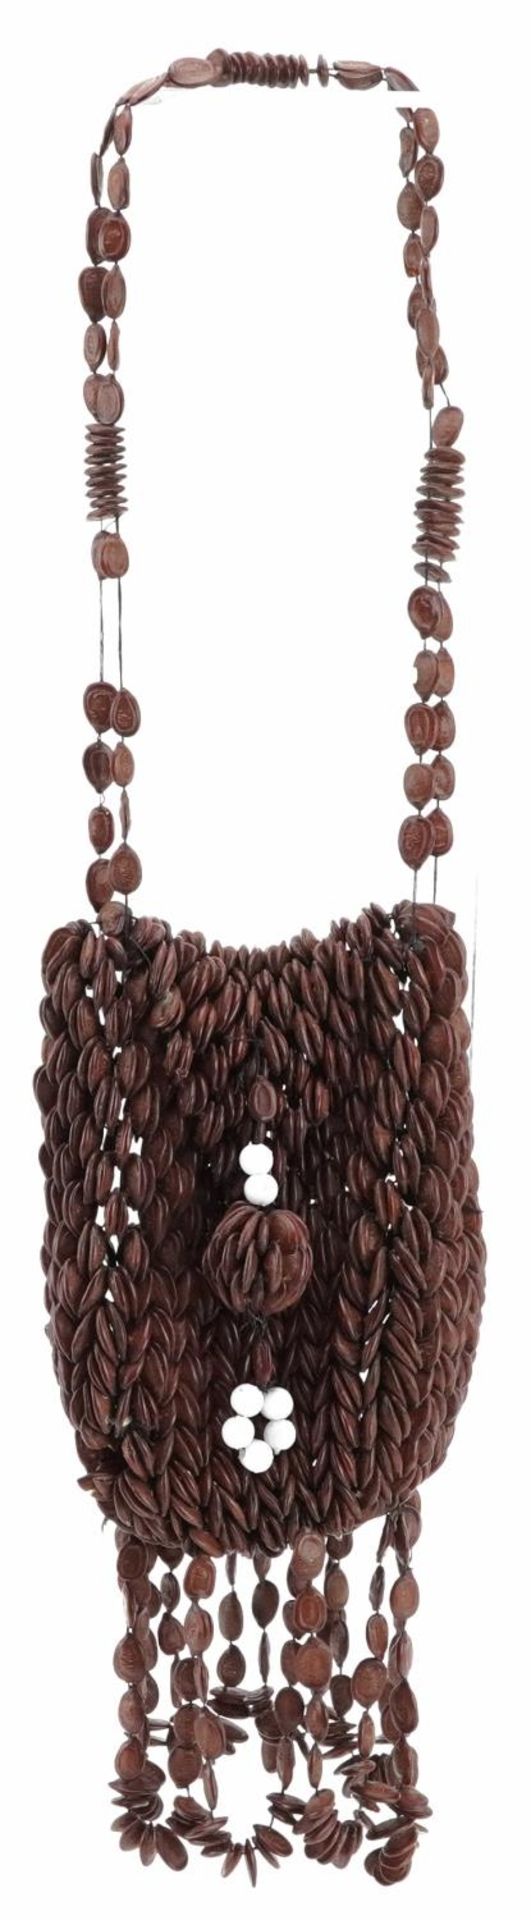 Vintage beaded bag, 10cm x 9cm : For further information on this lot please visit - Image 2 of 4